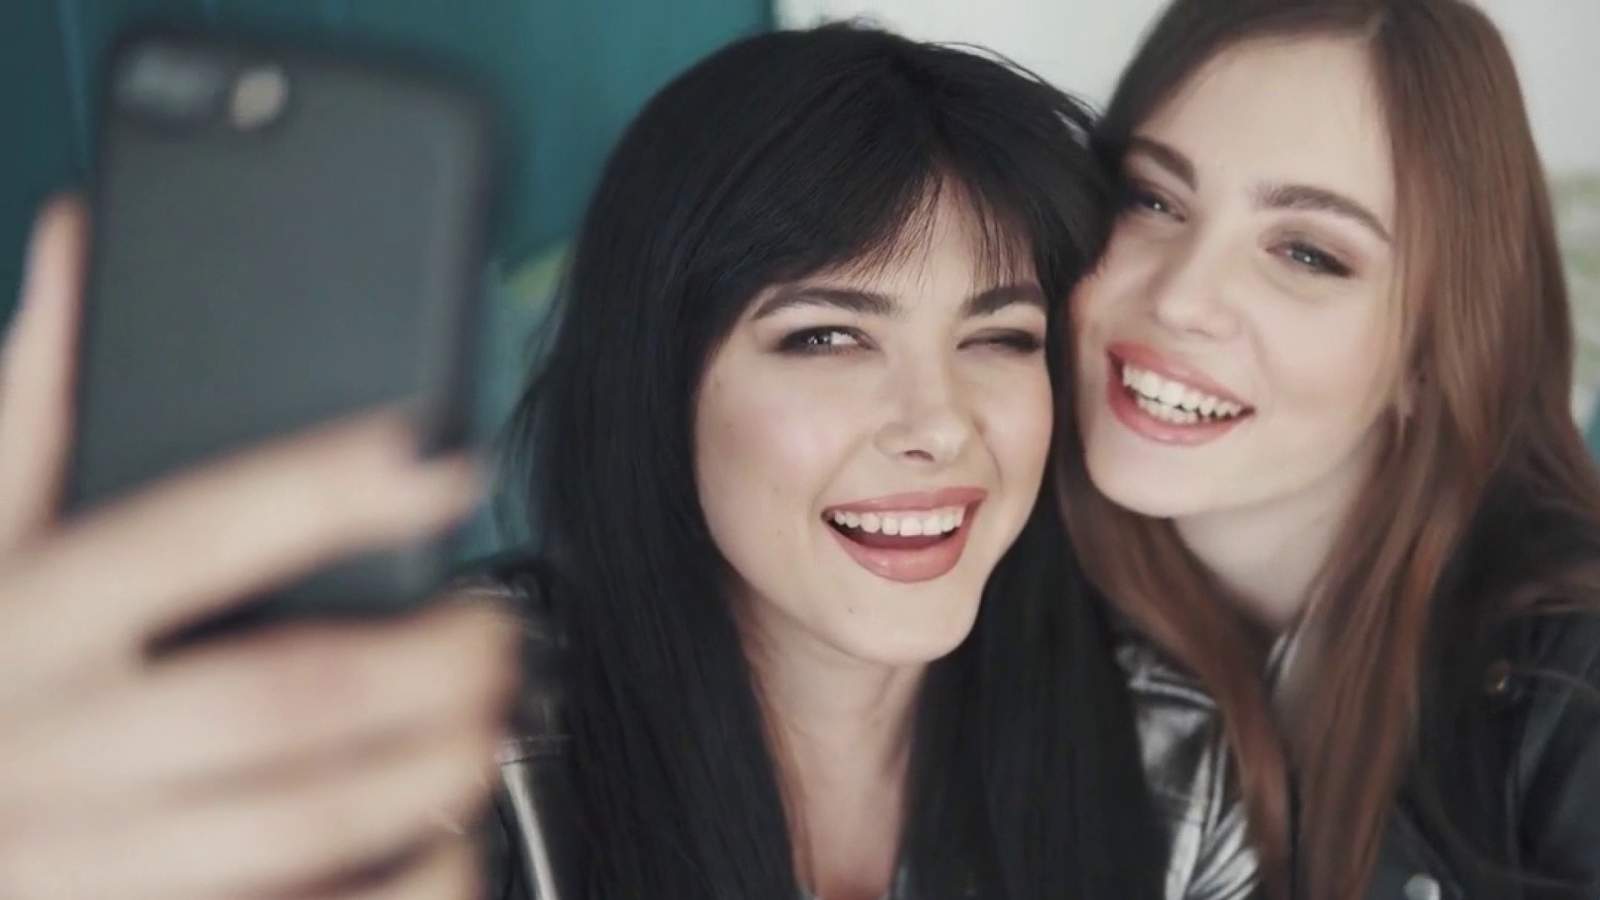 Need braces for back-to-school season? Start by taking some selfies from your phone